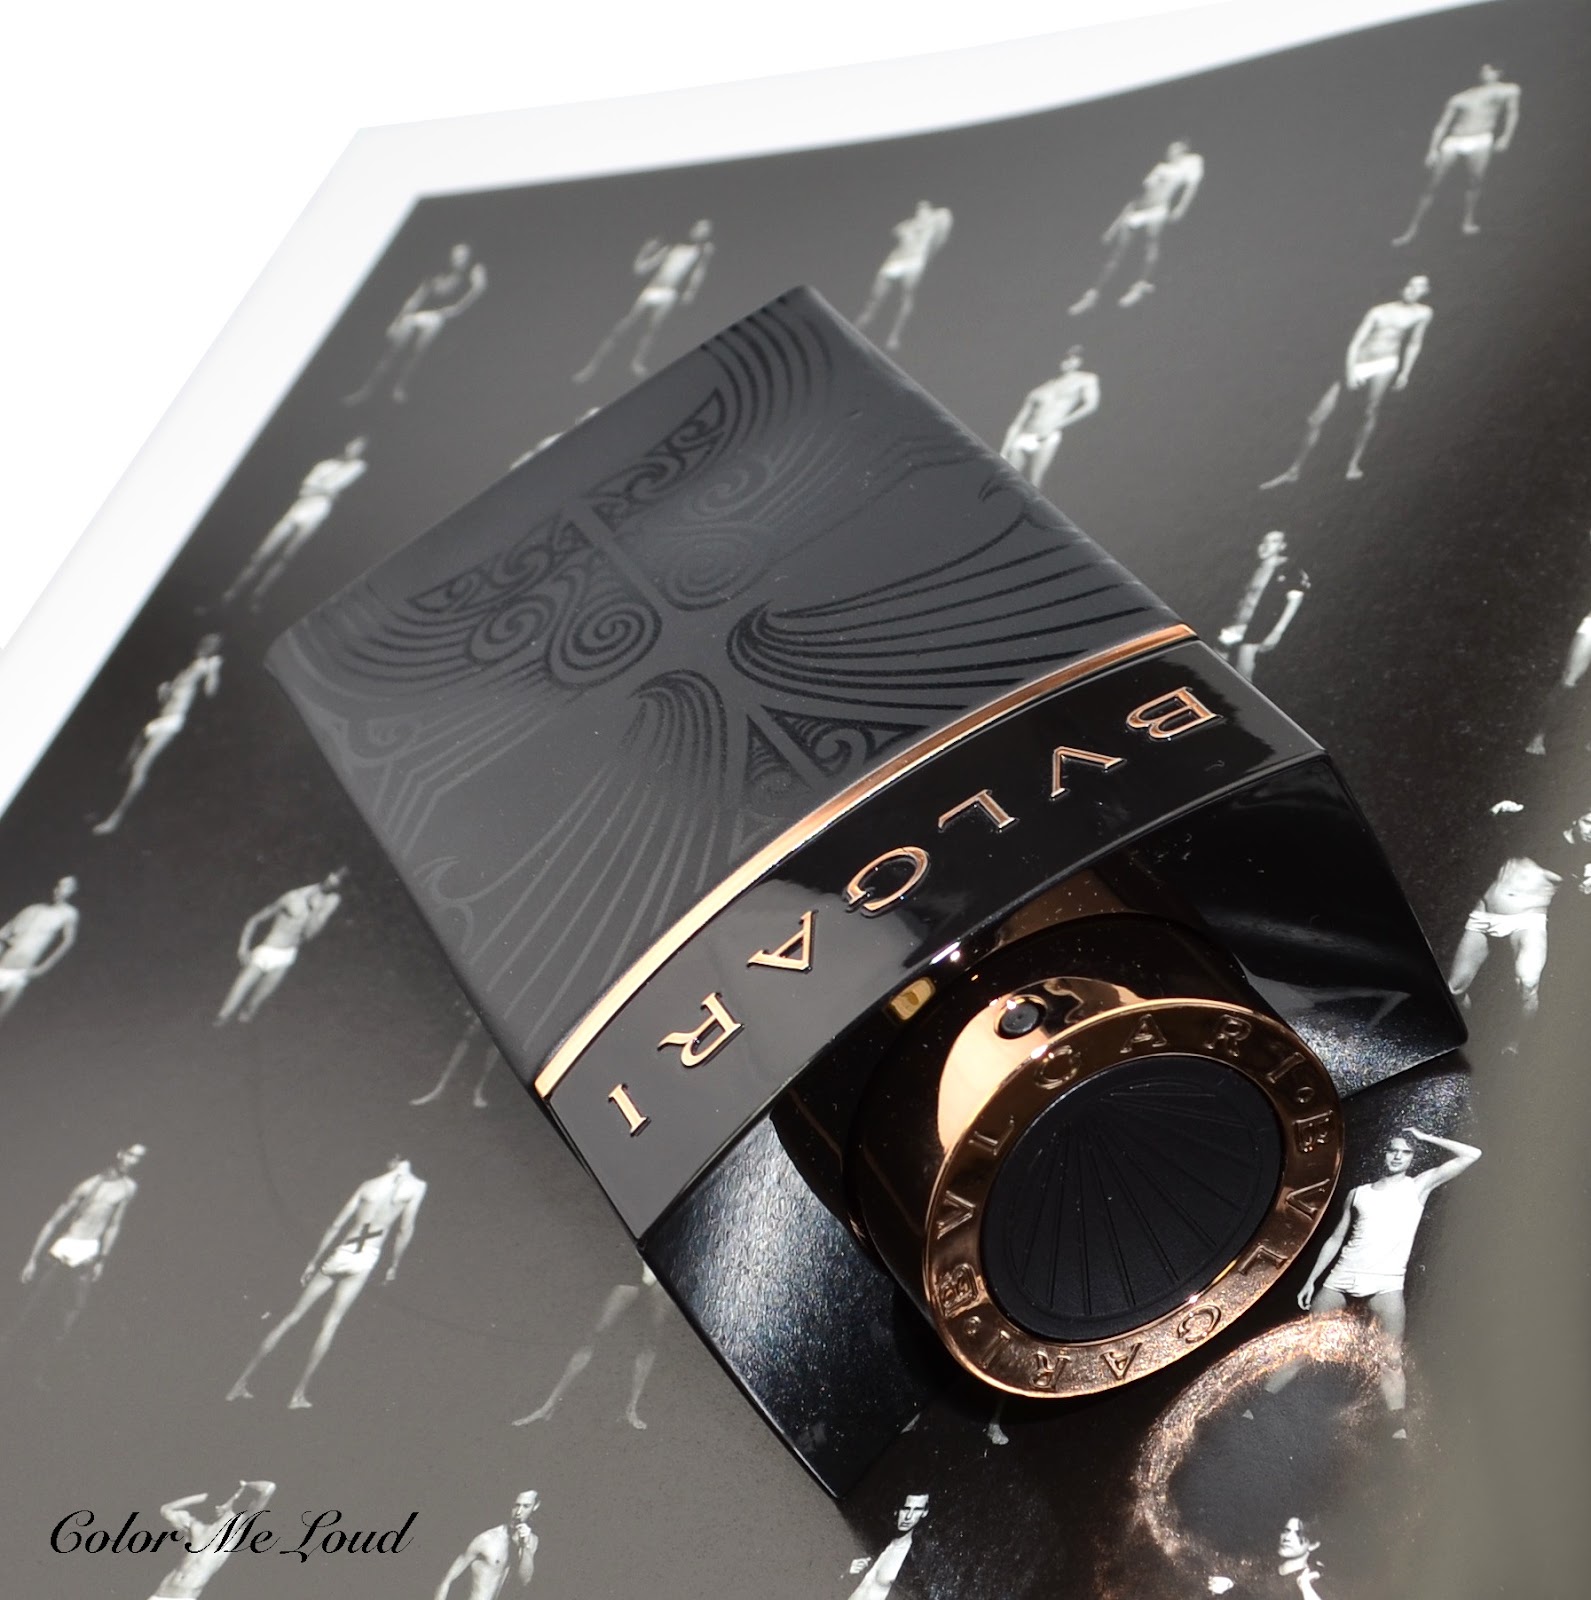 bvlgari man in black limited edition review